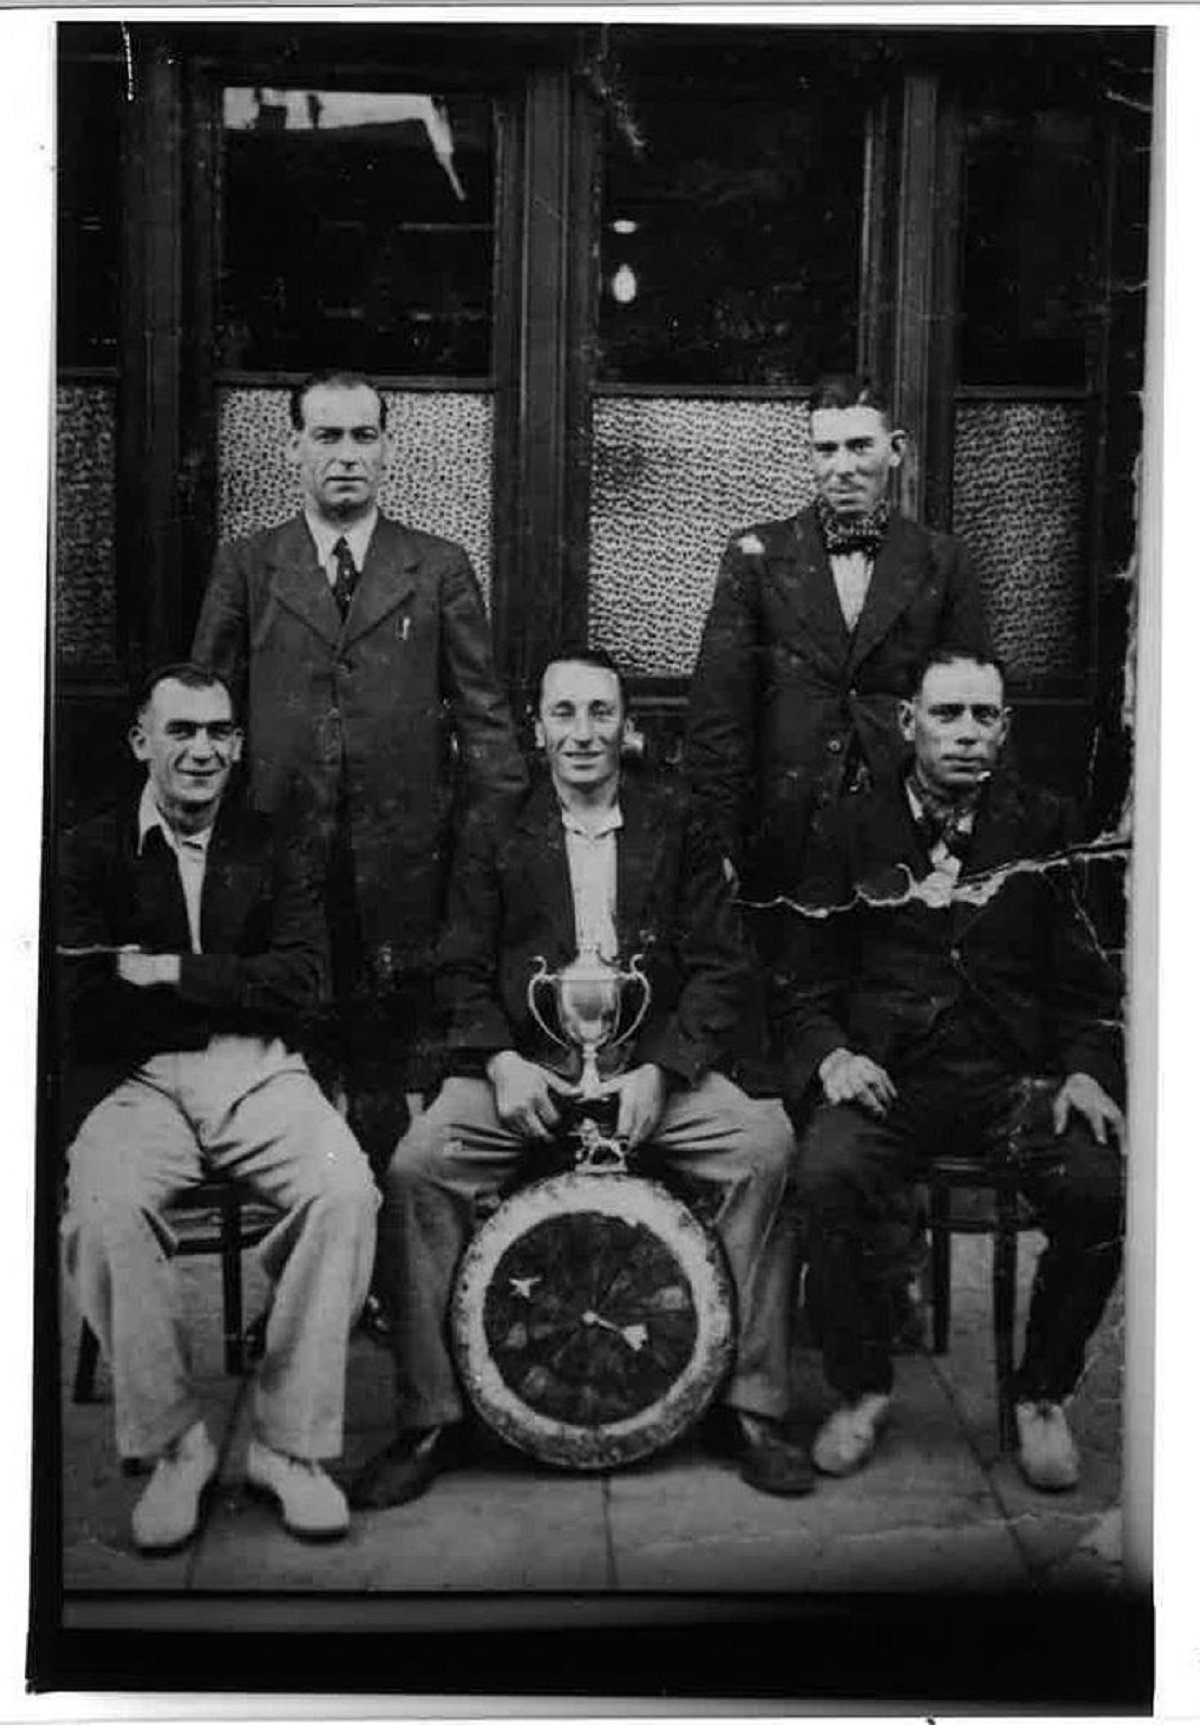 Cup kings - we know little about this picture, apart from the fact it was taken in 1936. Can you shed any light?